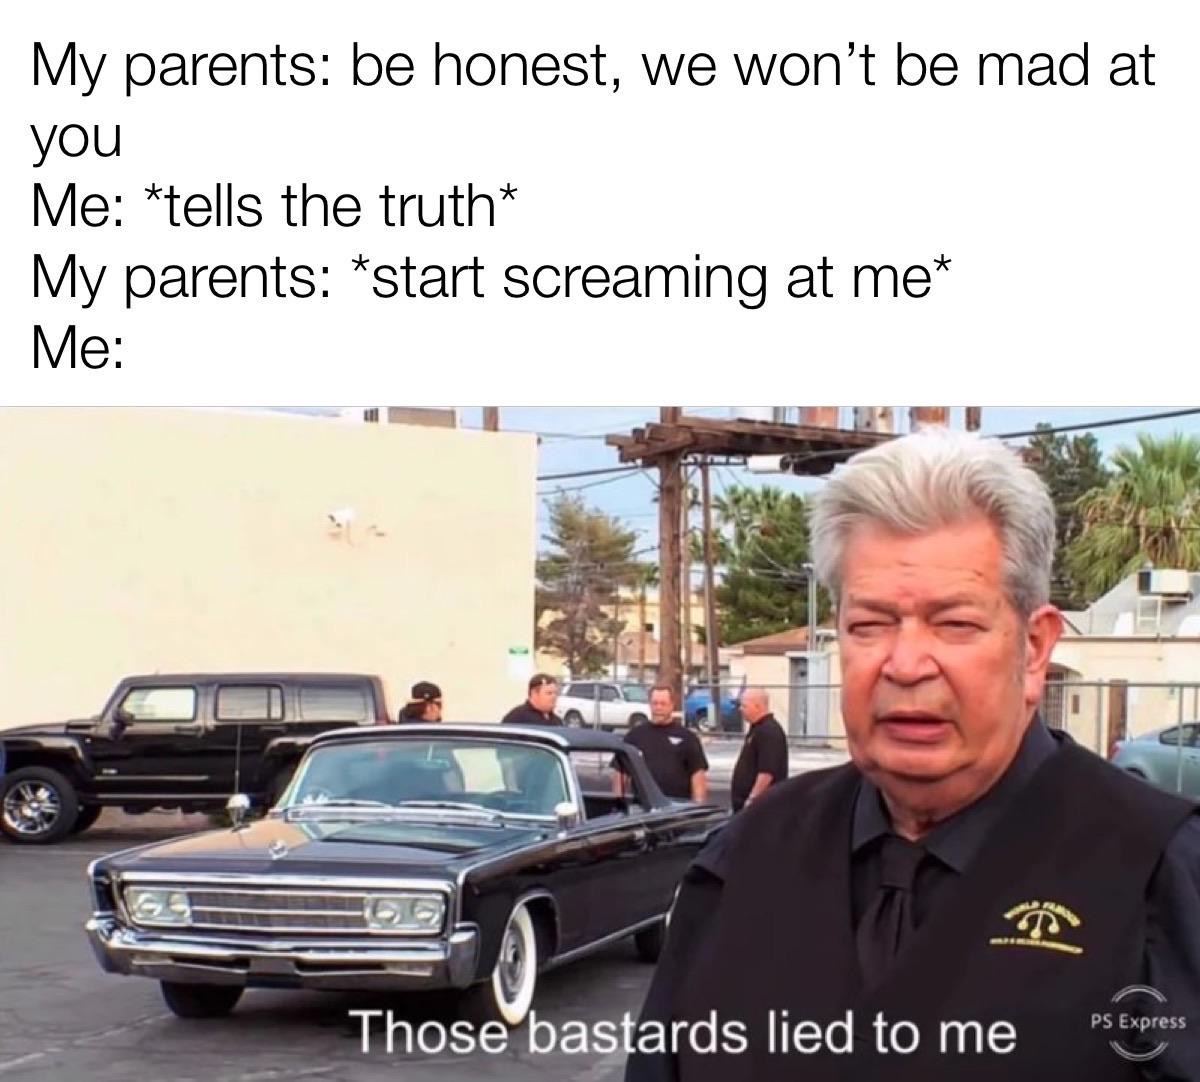 20s pandemics meme - My parents be honest, we won't be mad at you Me tells the truth My parents start screaming at me Me Those bastards lied to me Ps Express